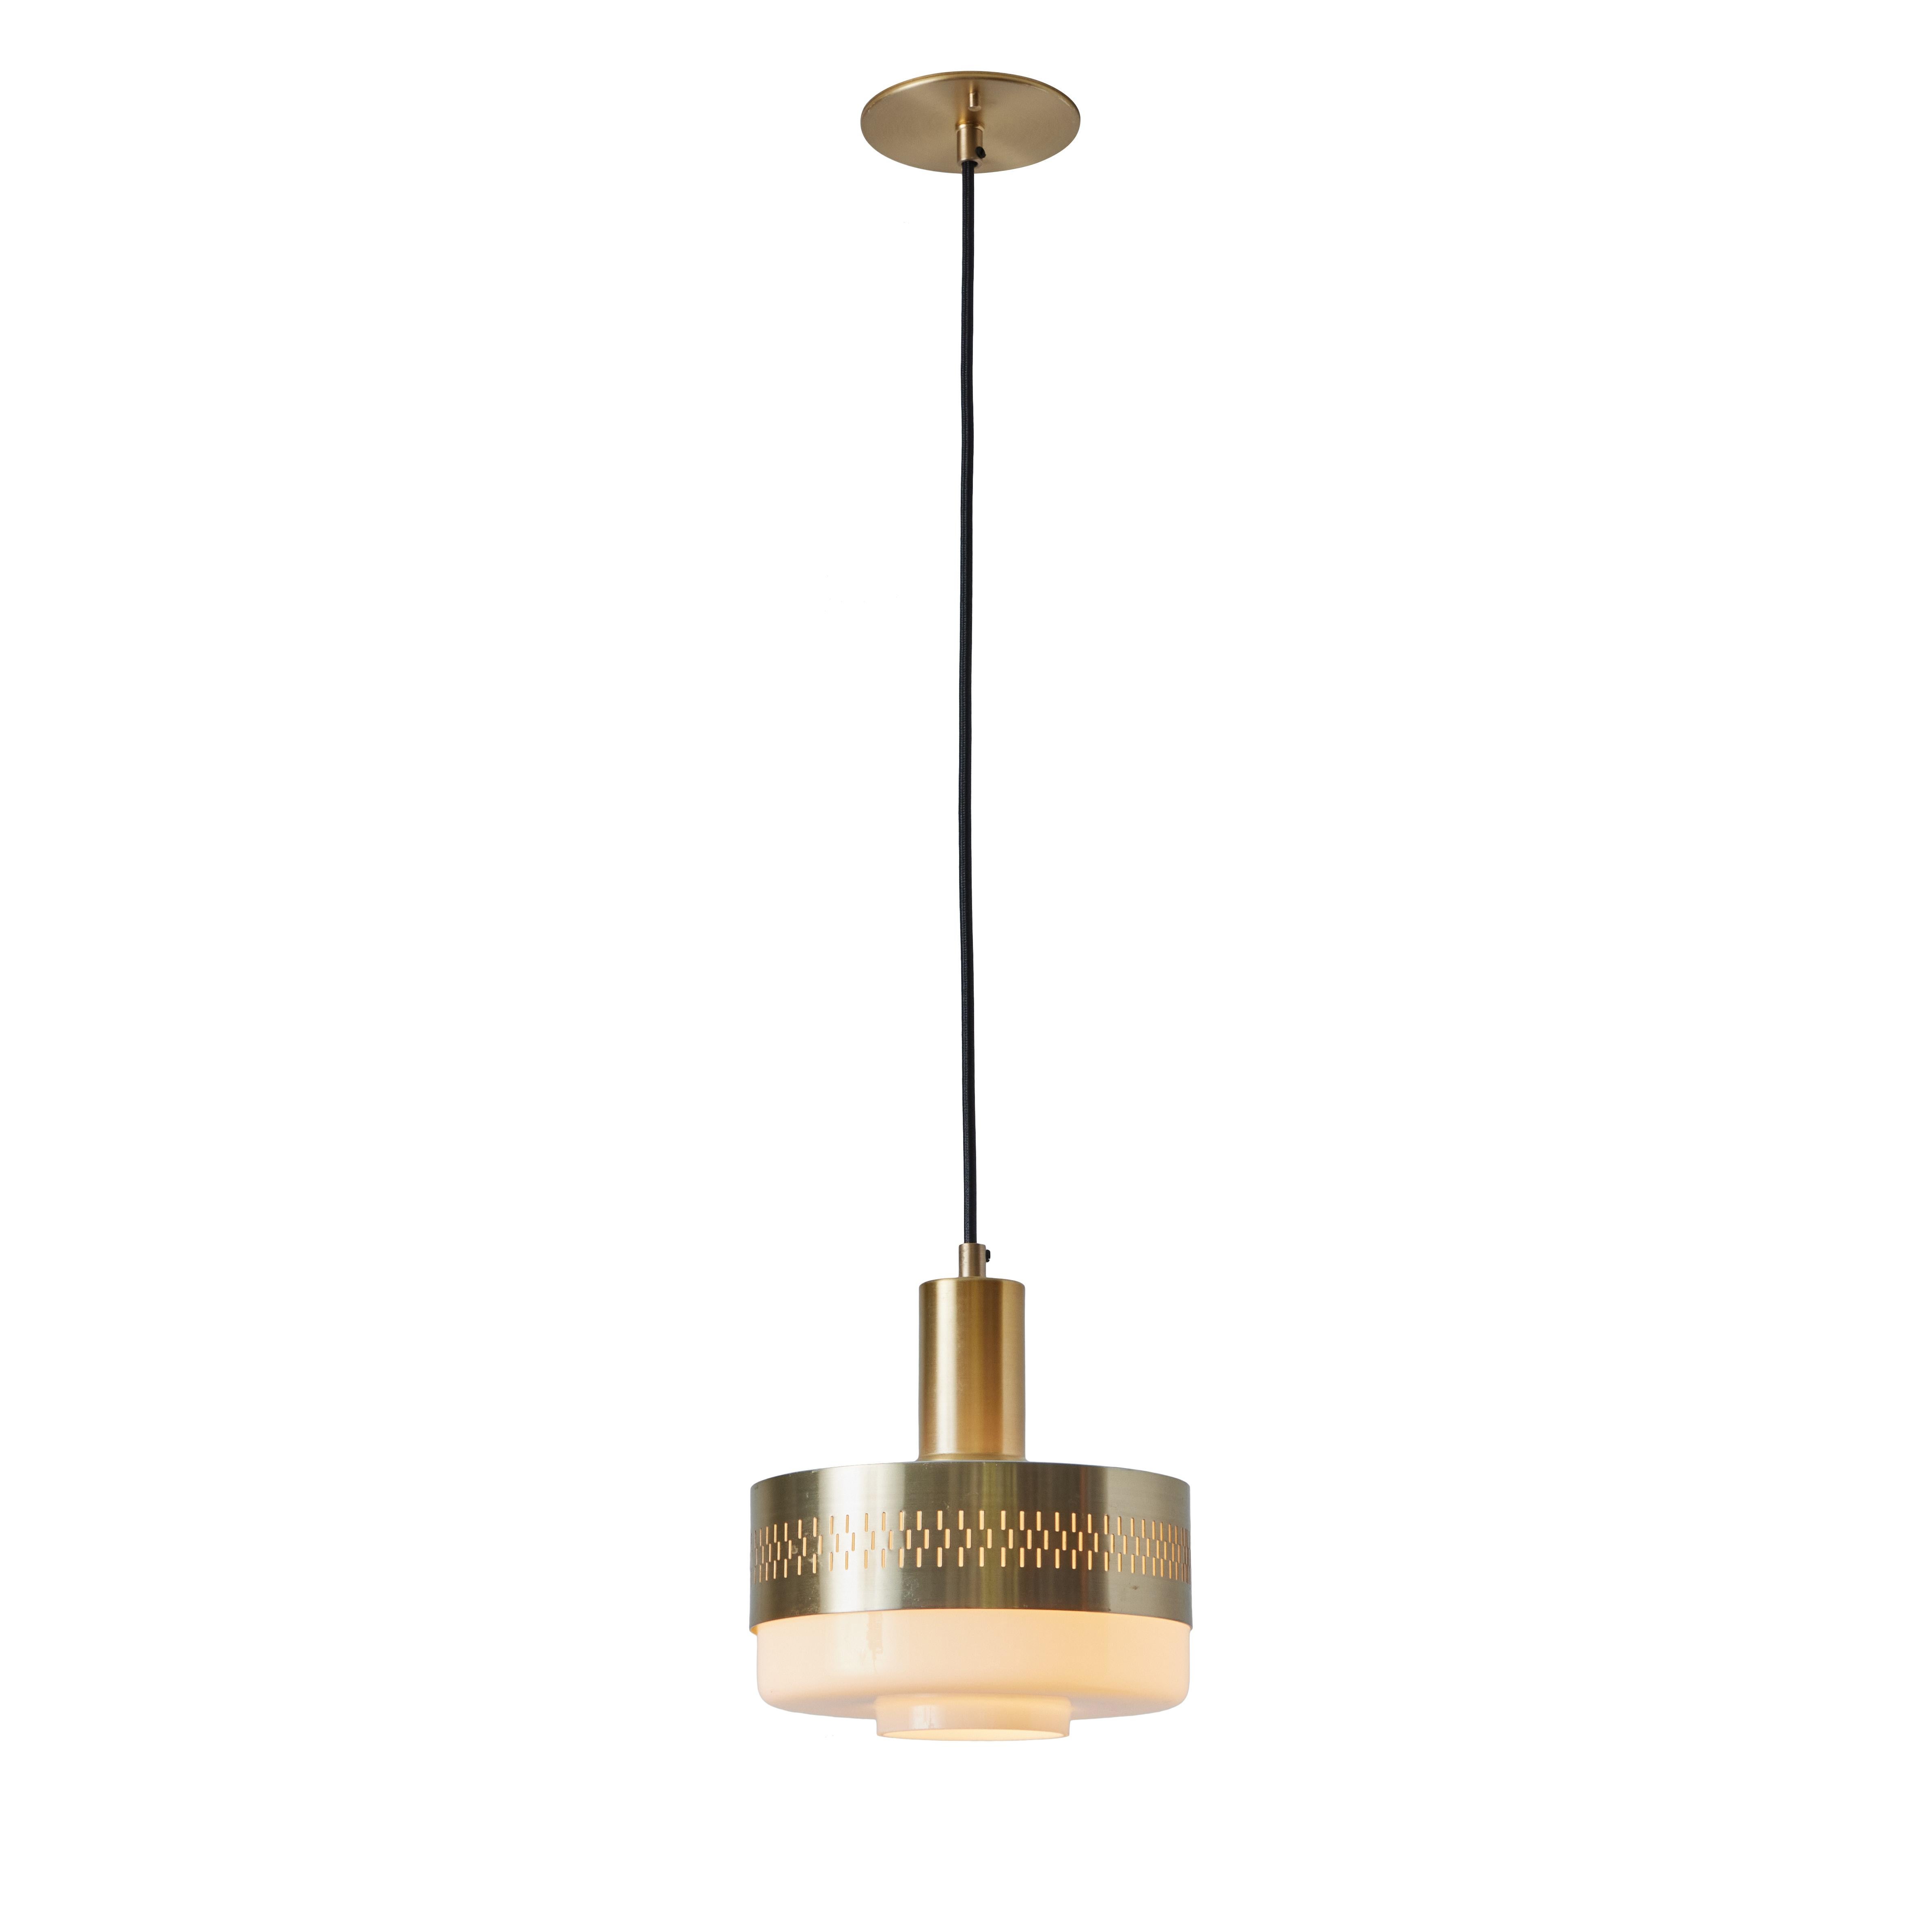 1960s Perforated Brass & Glass Pendant Attributed to Hans-Agne Jakobsson For Sale 11